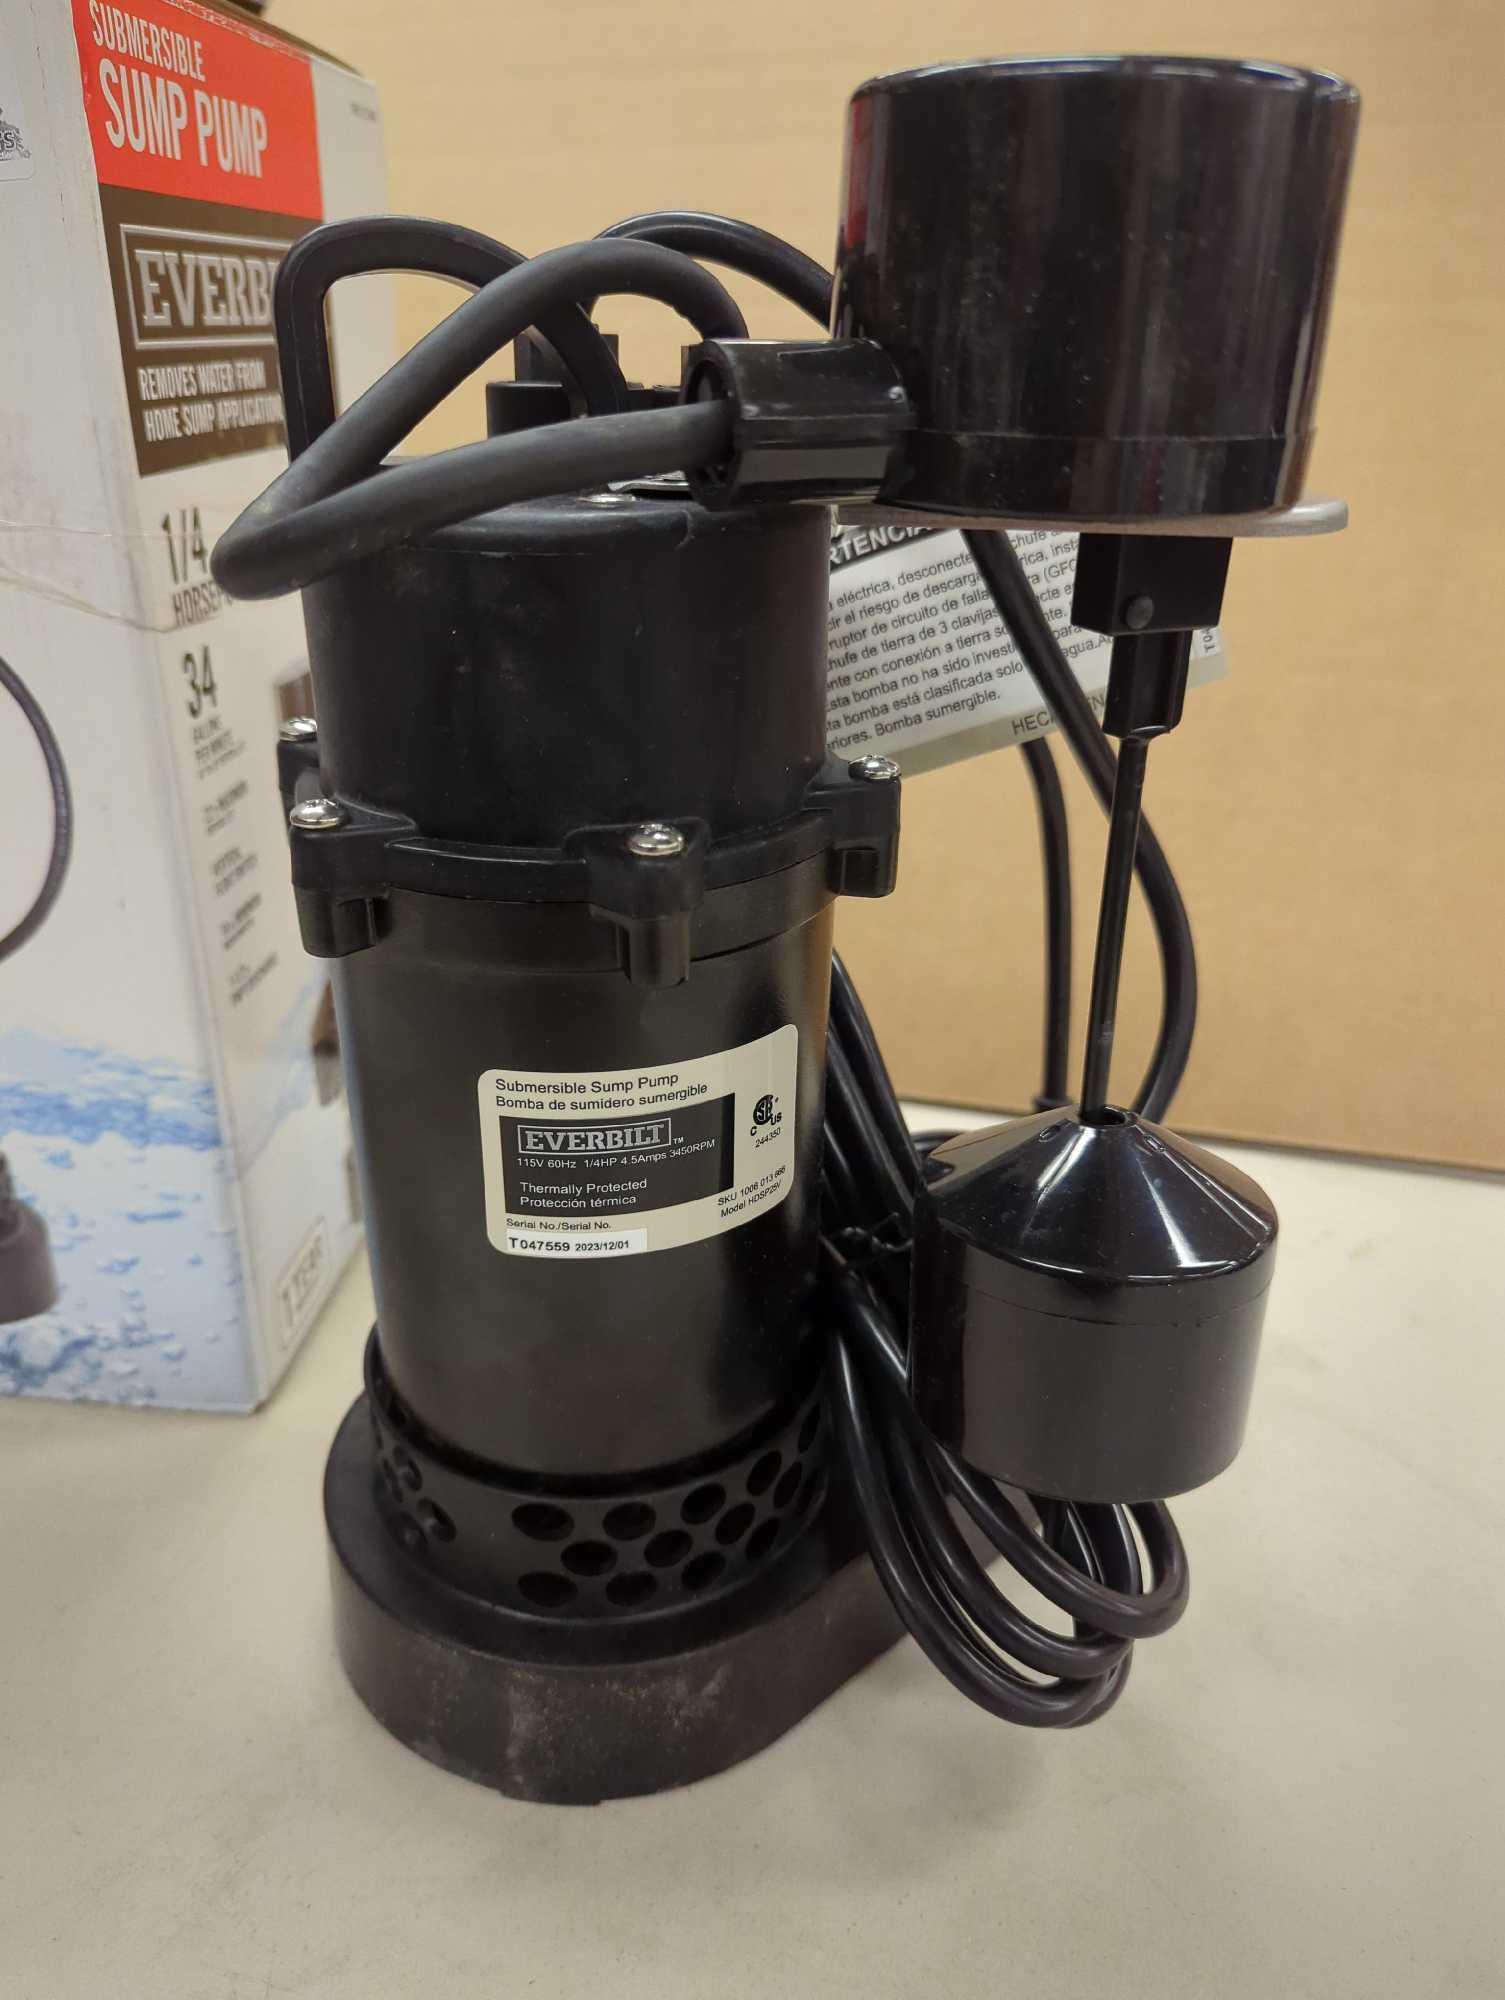 Everbilt 1/4 HP Aluminum Sump Pump Vertical Switch. Comes in open box as is shown in photos. Appears